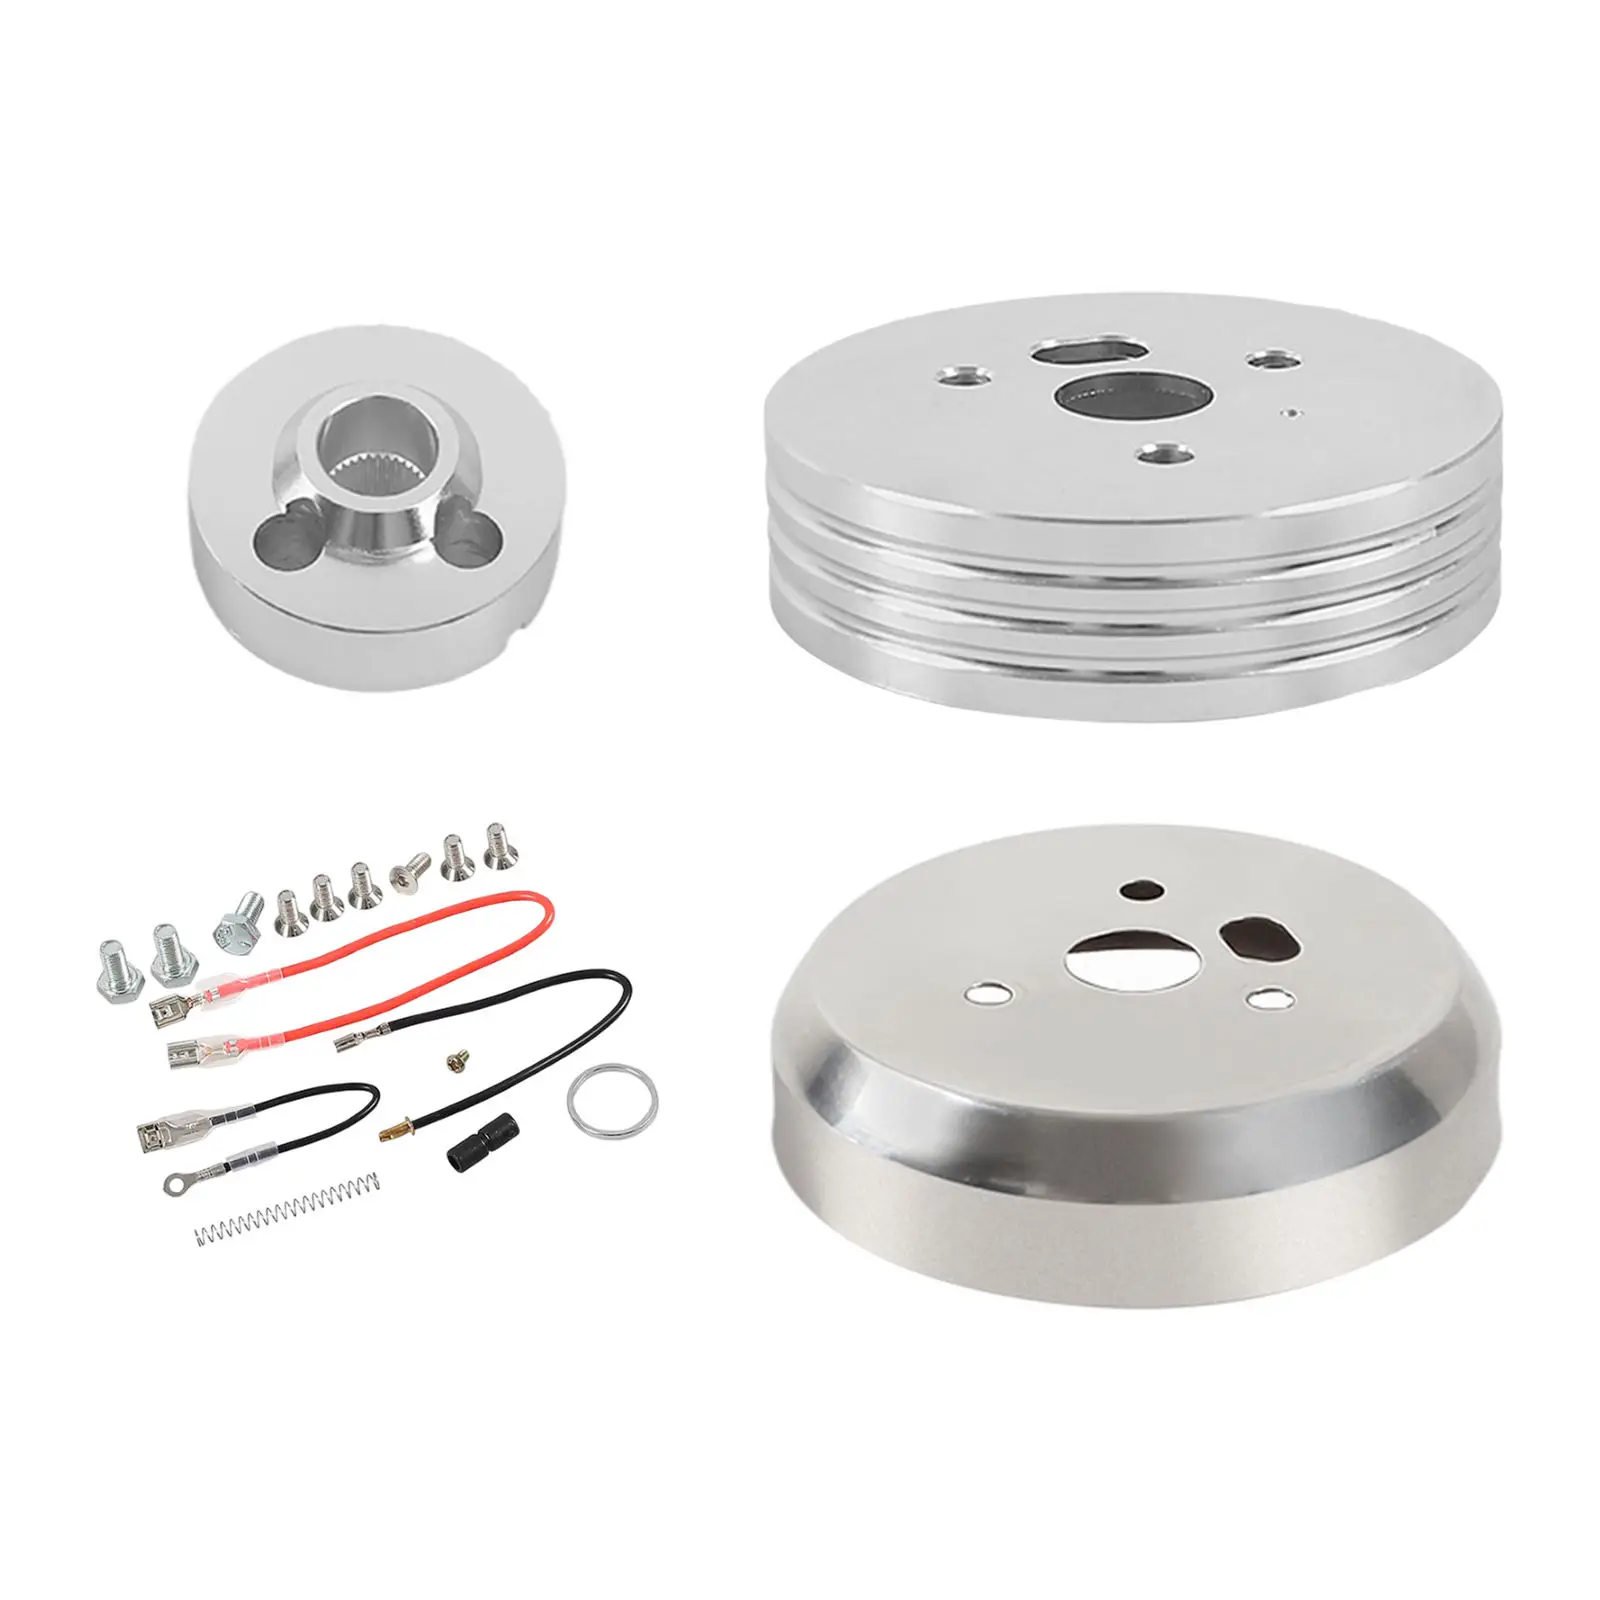 

5 6 Hole Billet Aluminum Alloy Steering Wheel Adapters Kit Designed for Chevy for GMC Racing Models